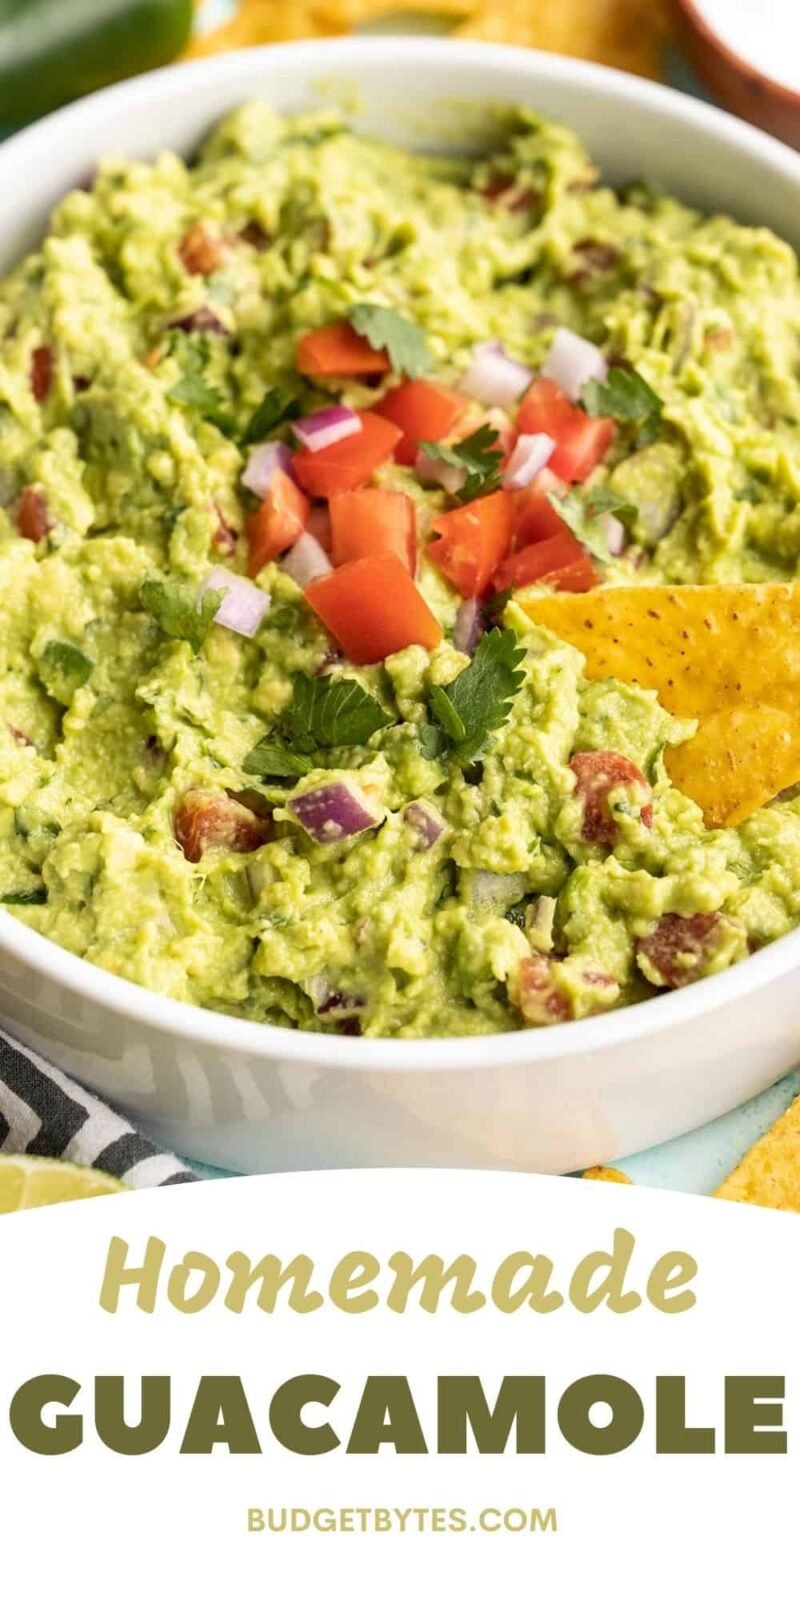 Side view of a chip dipping into a bowl of guacamole, title text at the bottom.